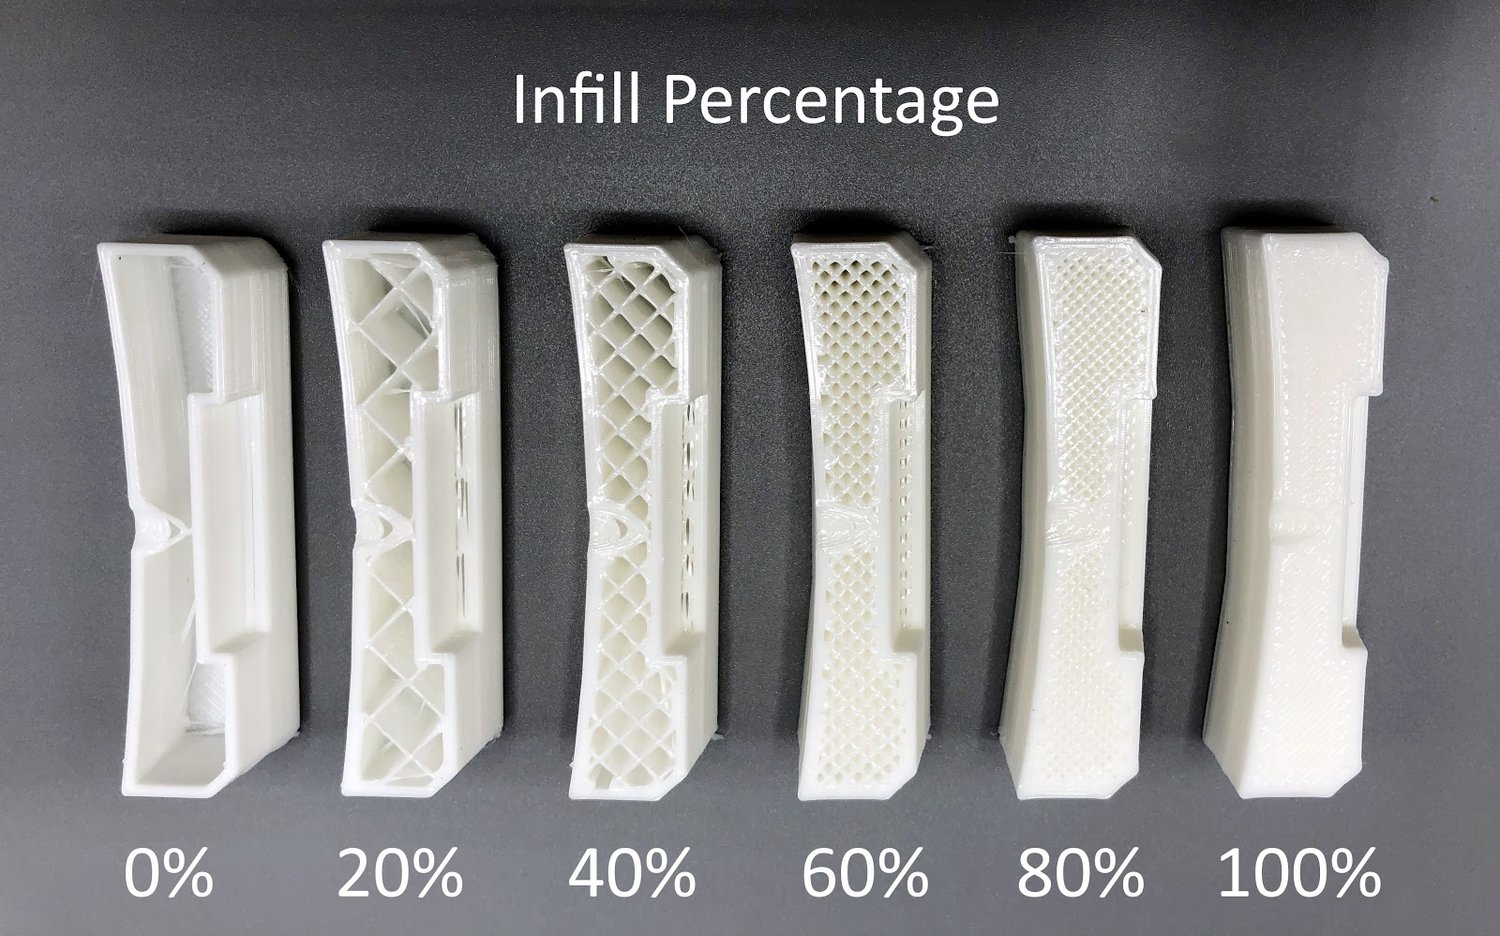 Cross-section of 3D printed parts at differing infill percentages